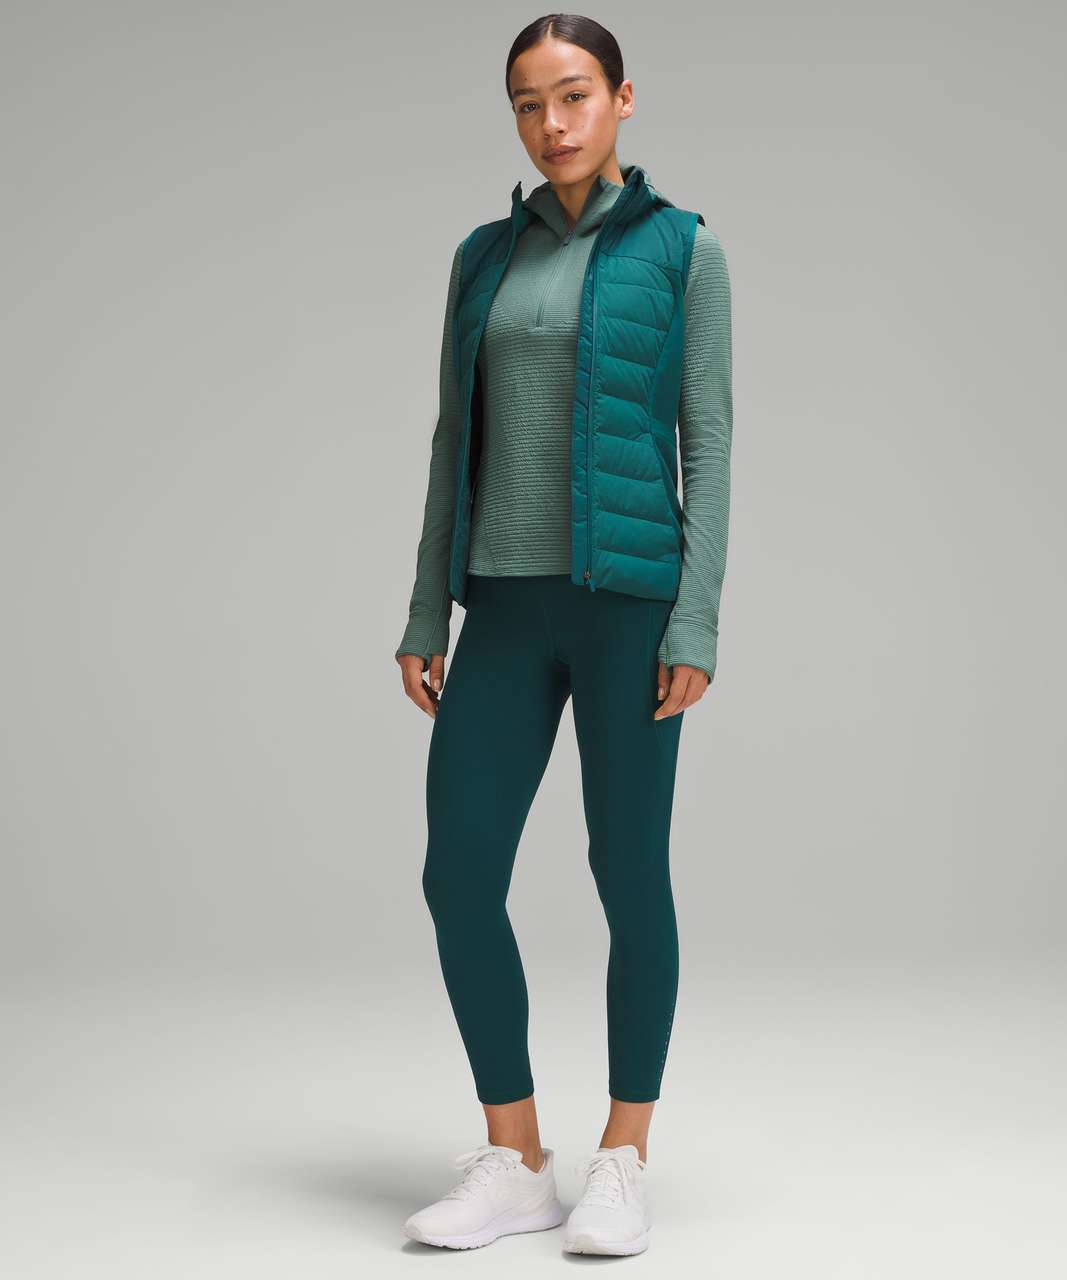 Lululemon Fast and Free High-Rise Fleece Tight 25" *Pockets - Storm Teal